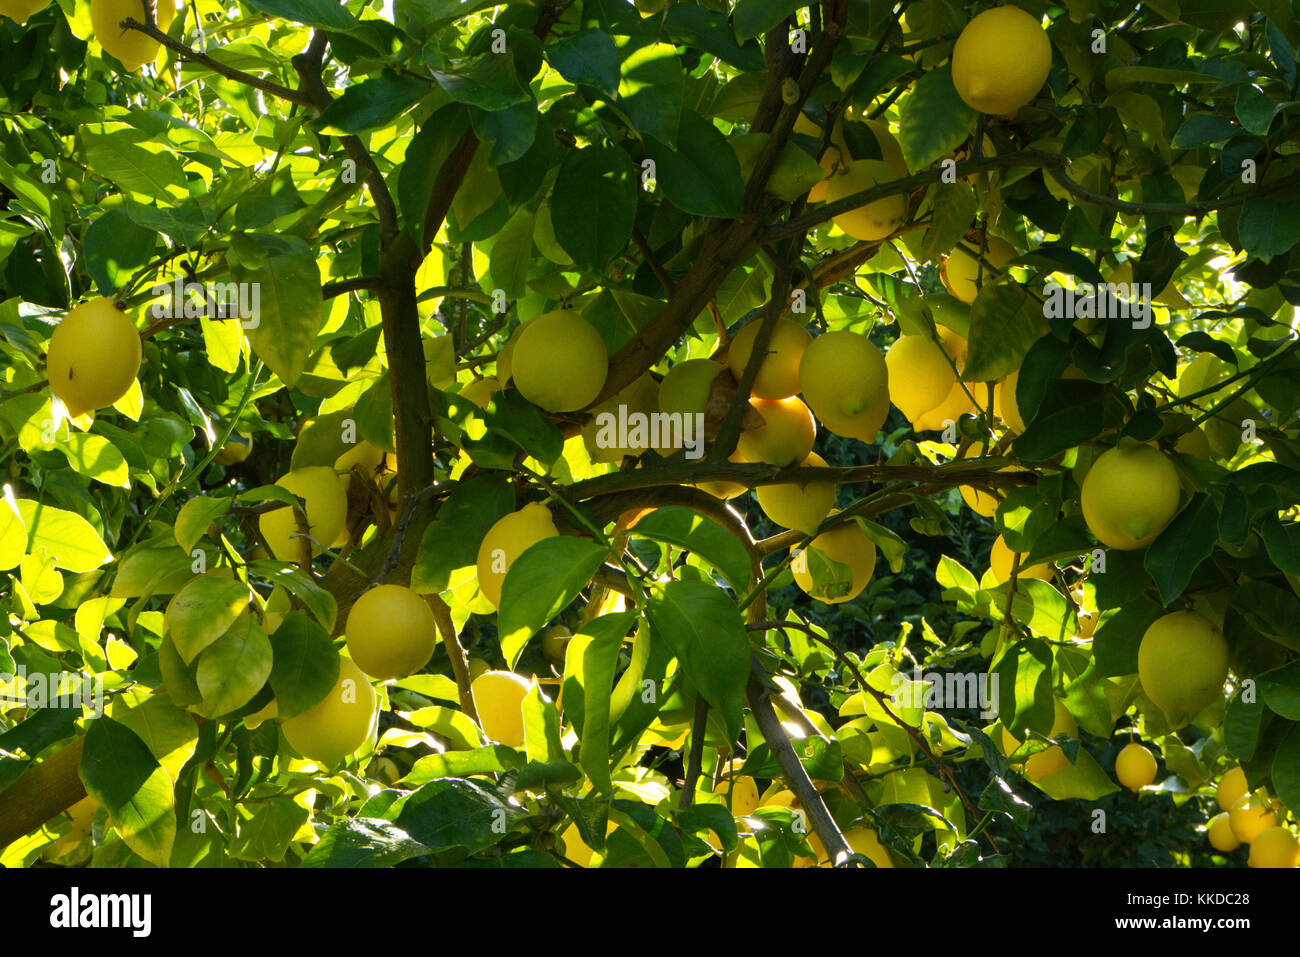 Lemons hanging on tree in commercial orchard ready for harvesting Stock Photo